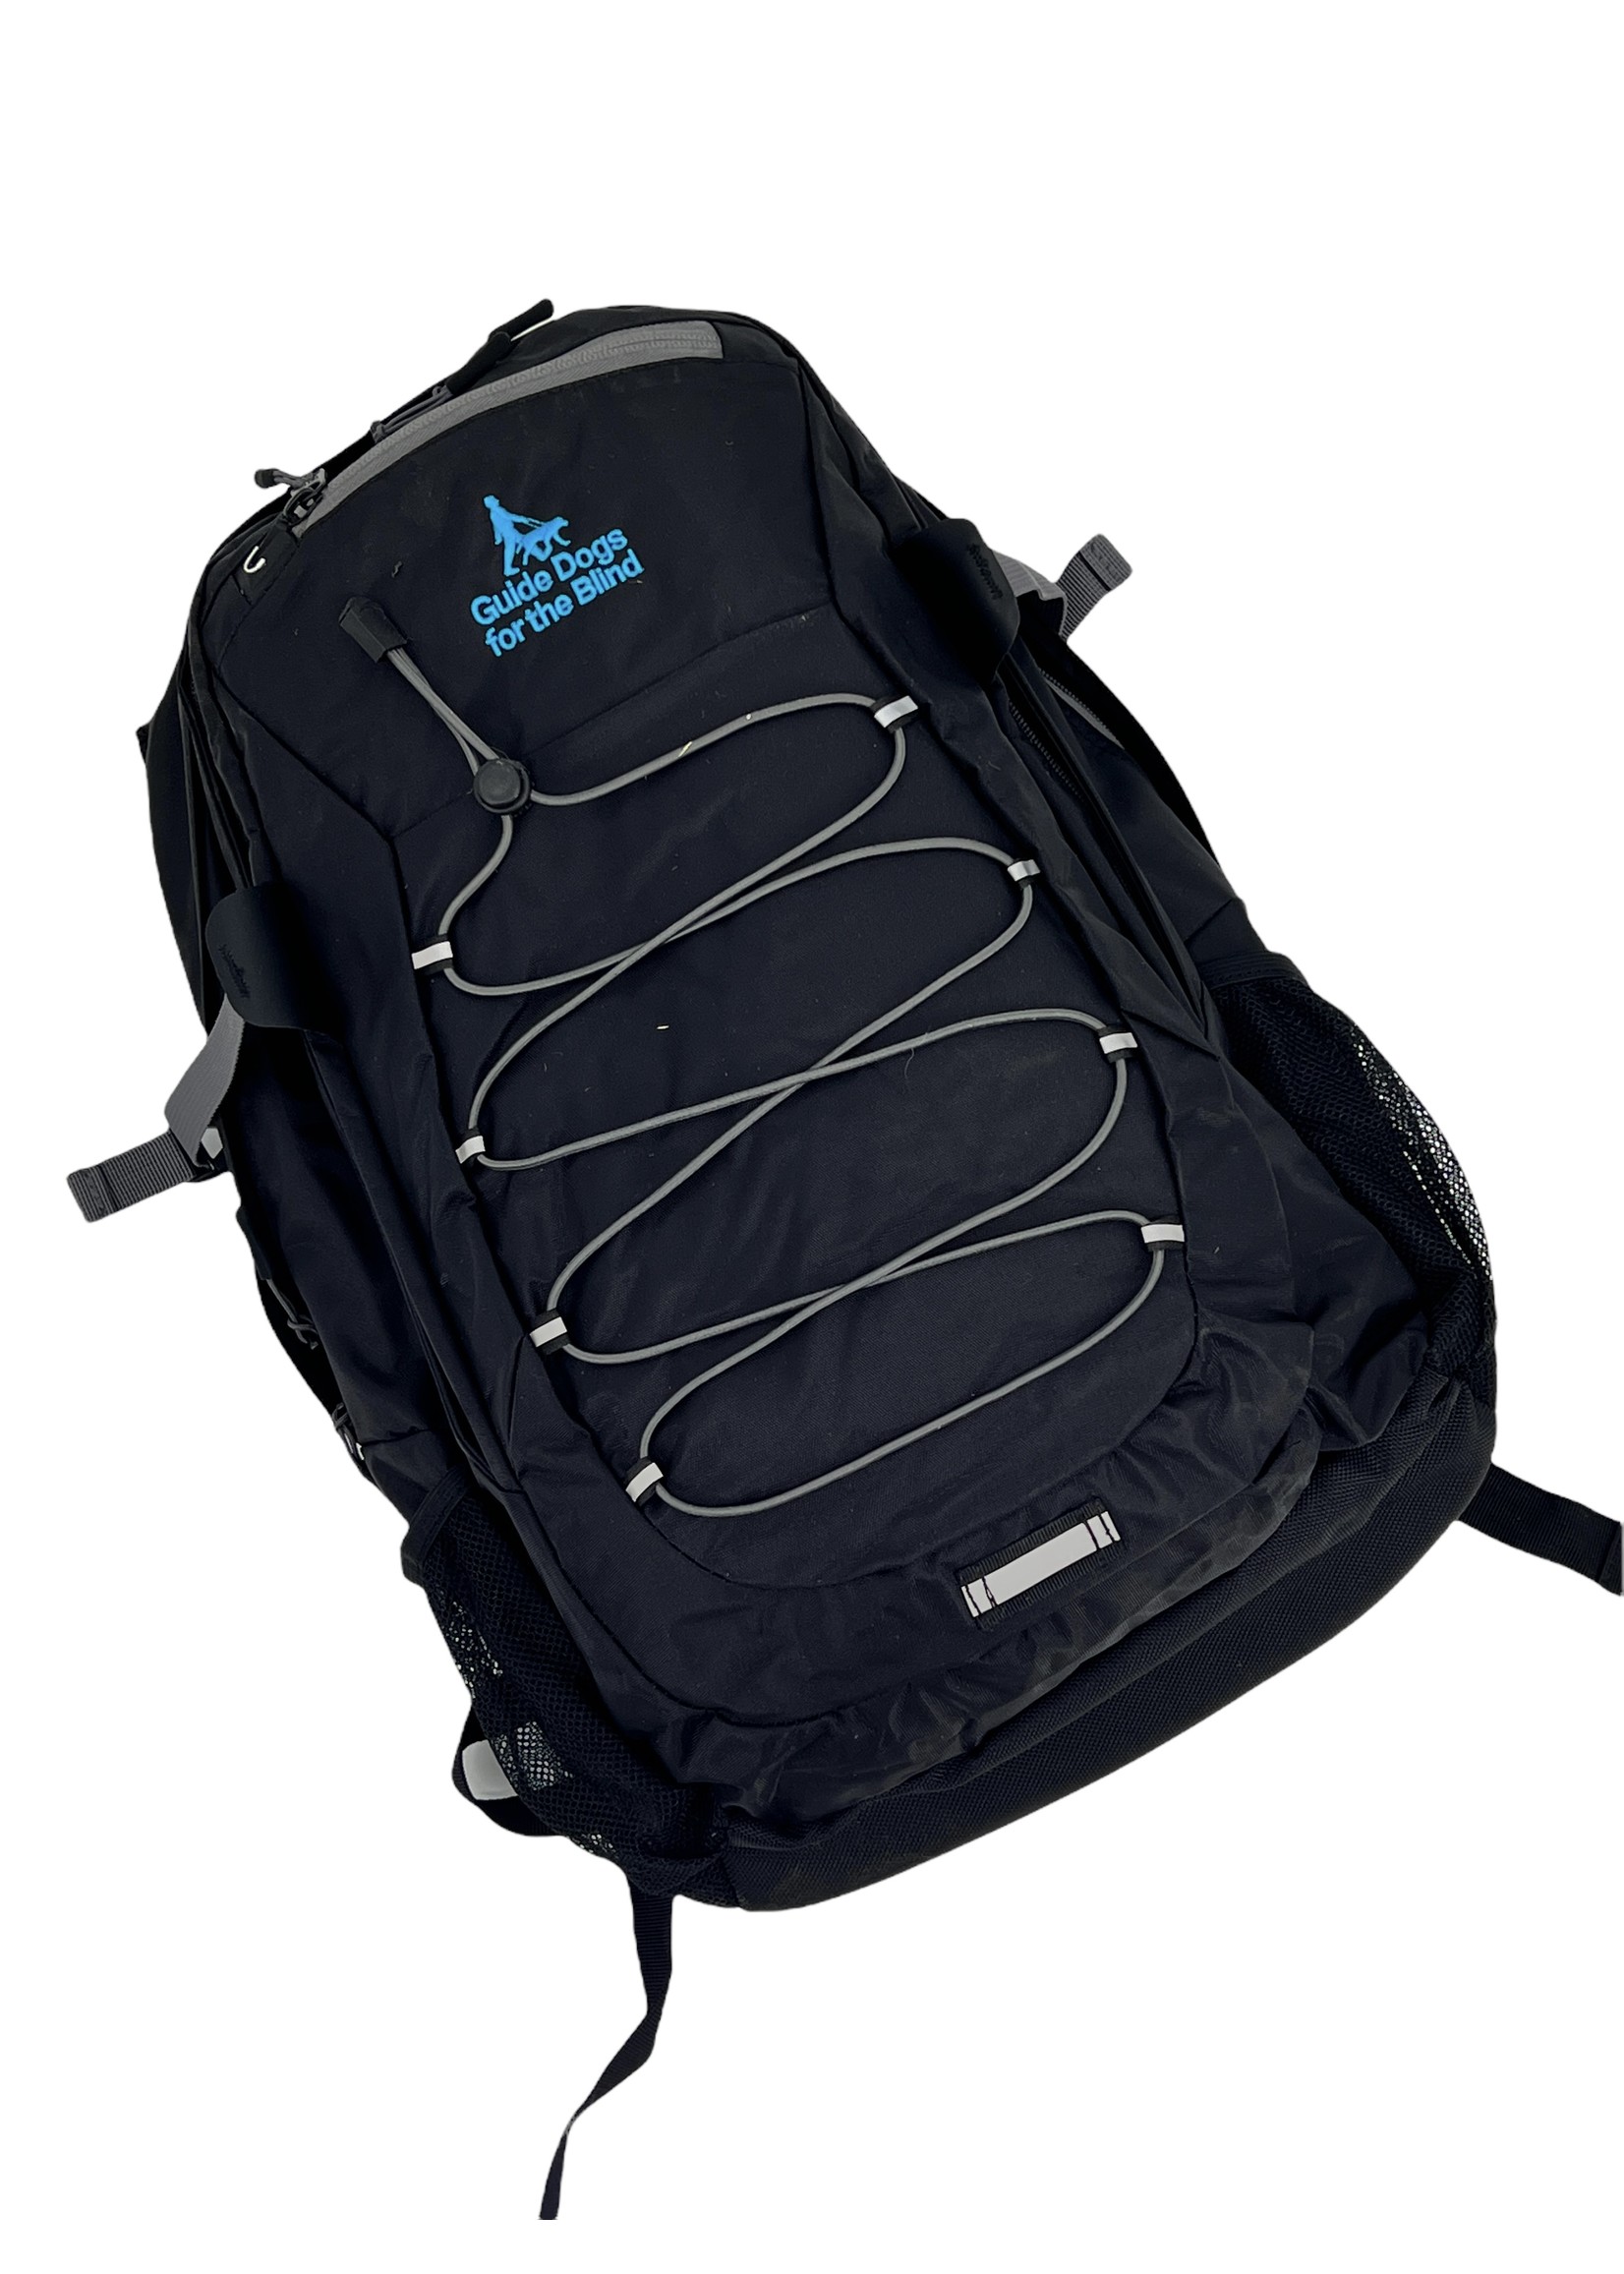 "Leader of the Pack" Backpack